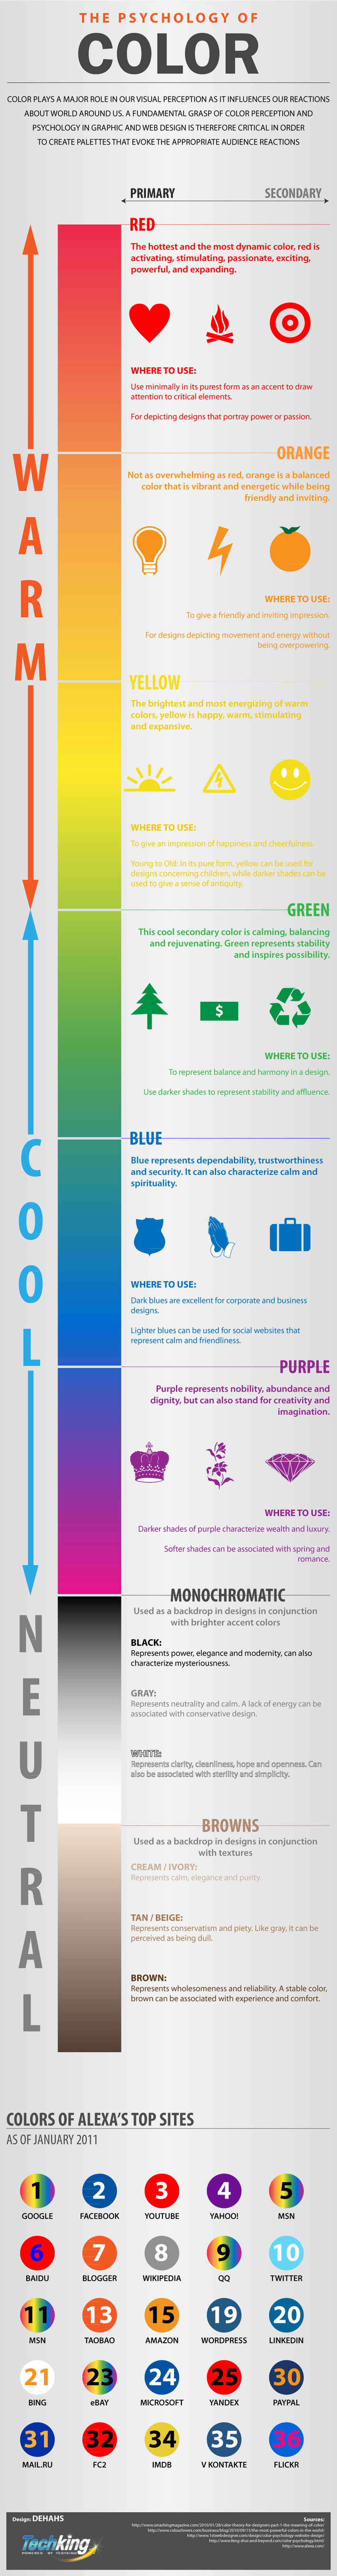 The Psychology of Color - Fascinating!